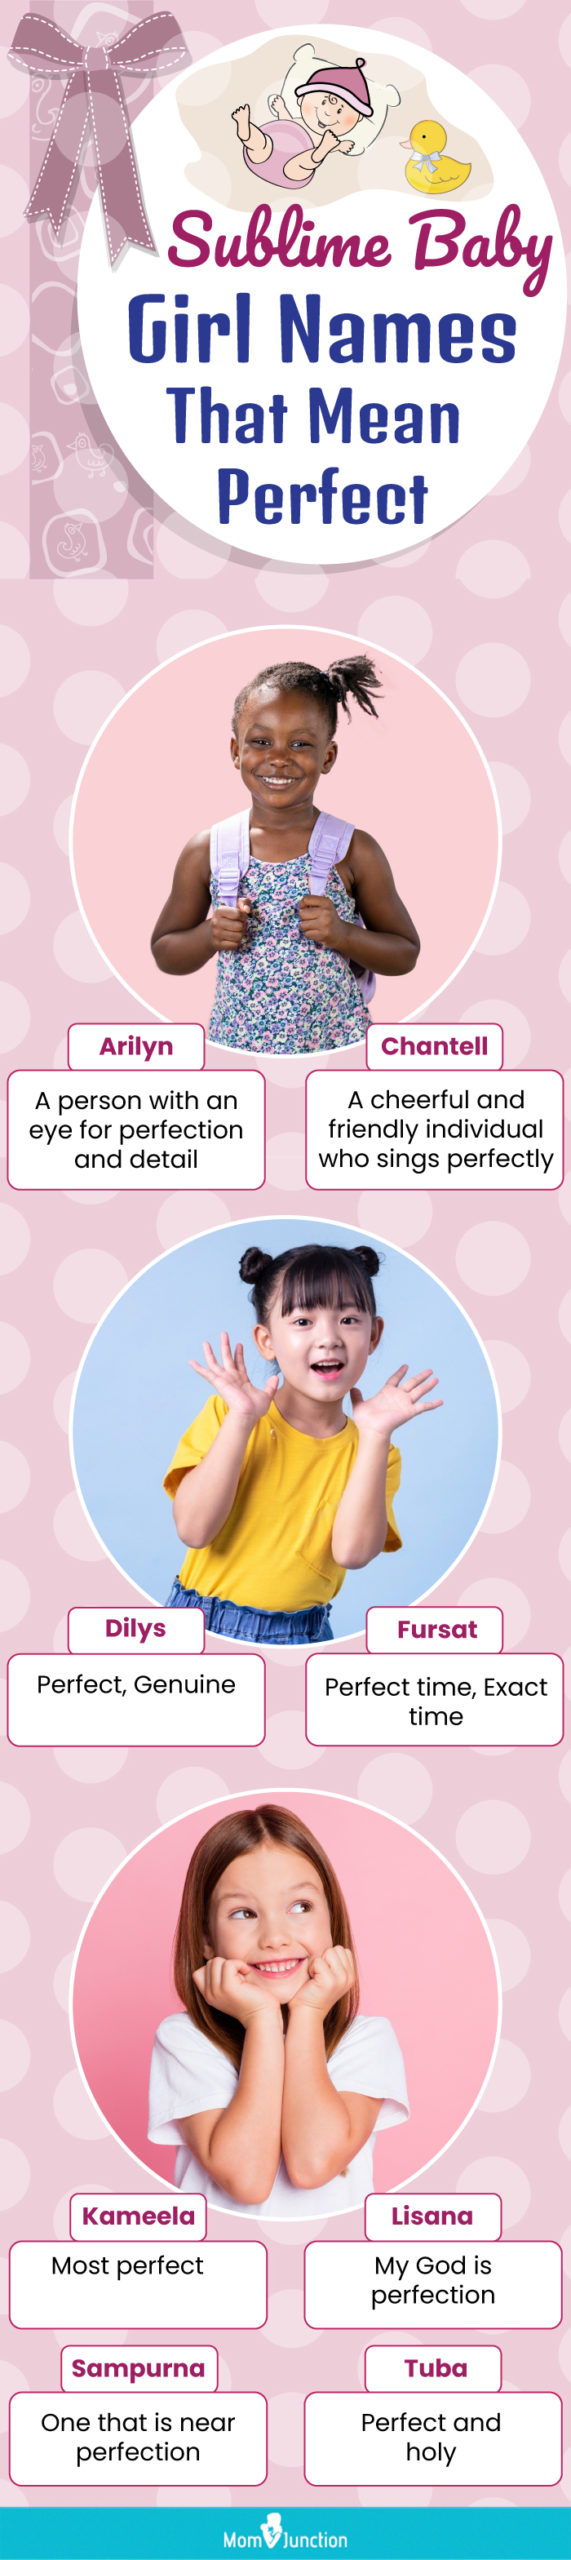 sublime baby girl names that mean perfect (infographic)